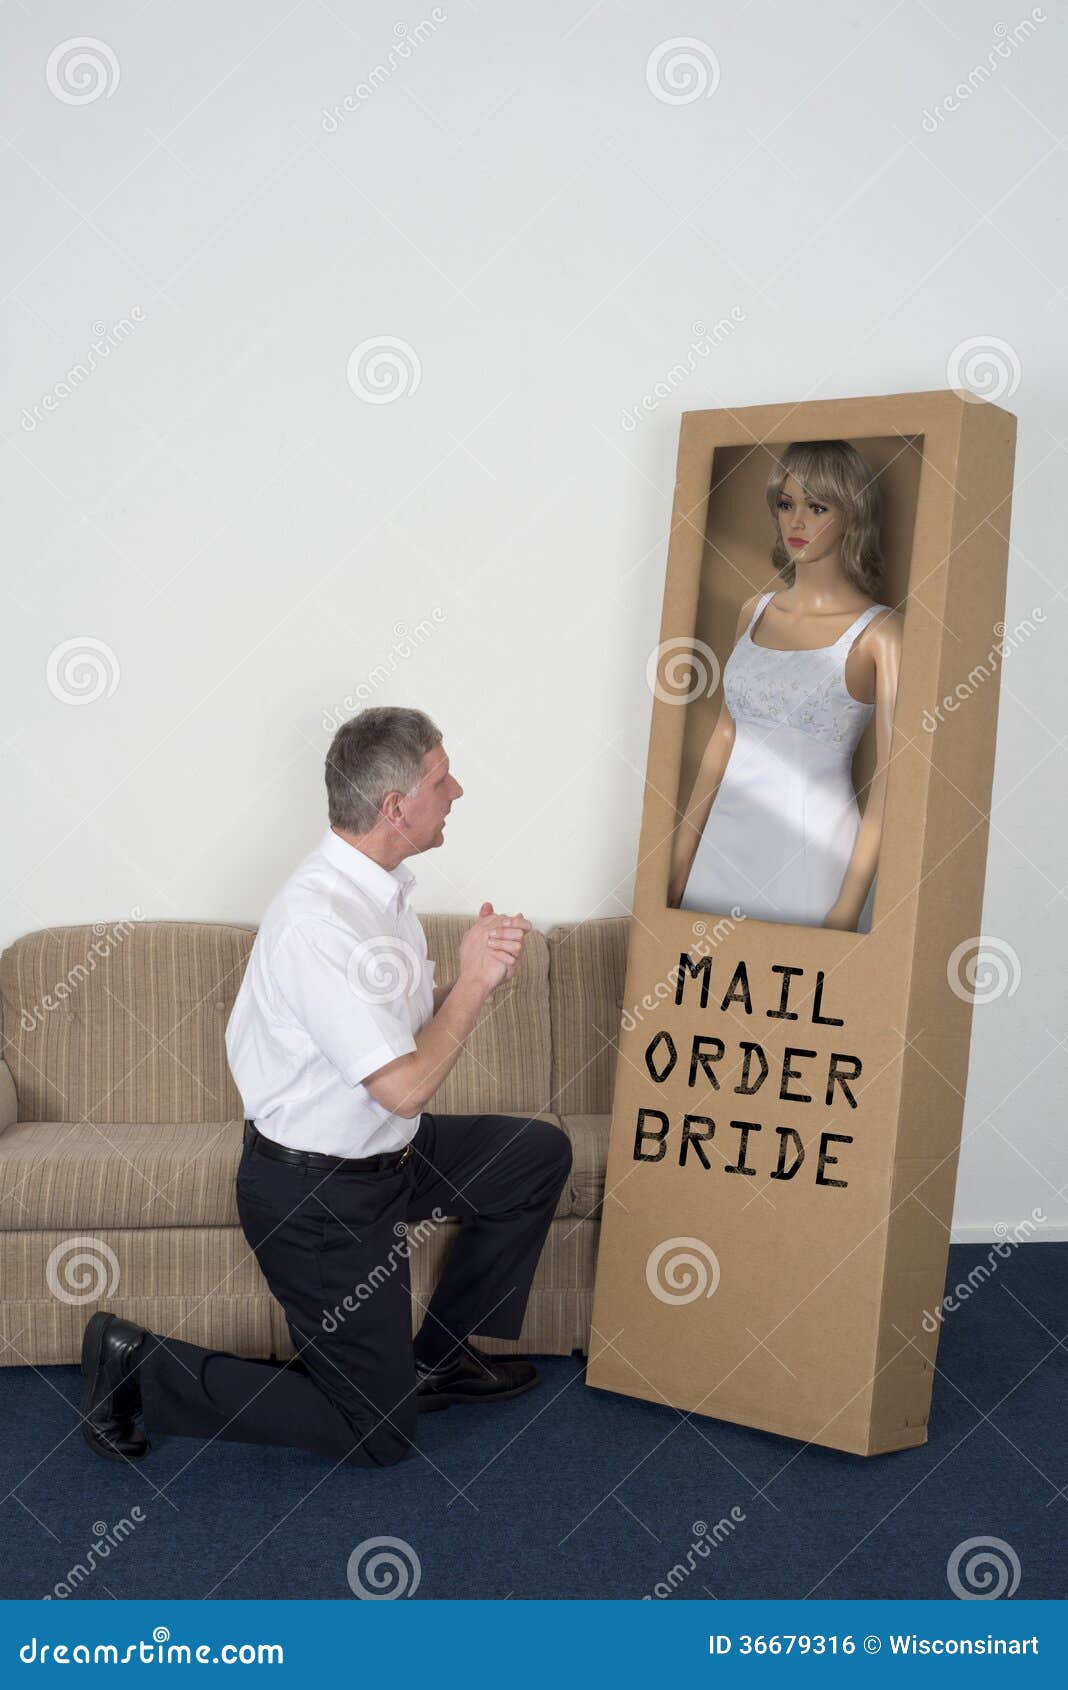 Day Mail Order Bride Concept 39